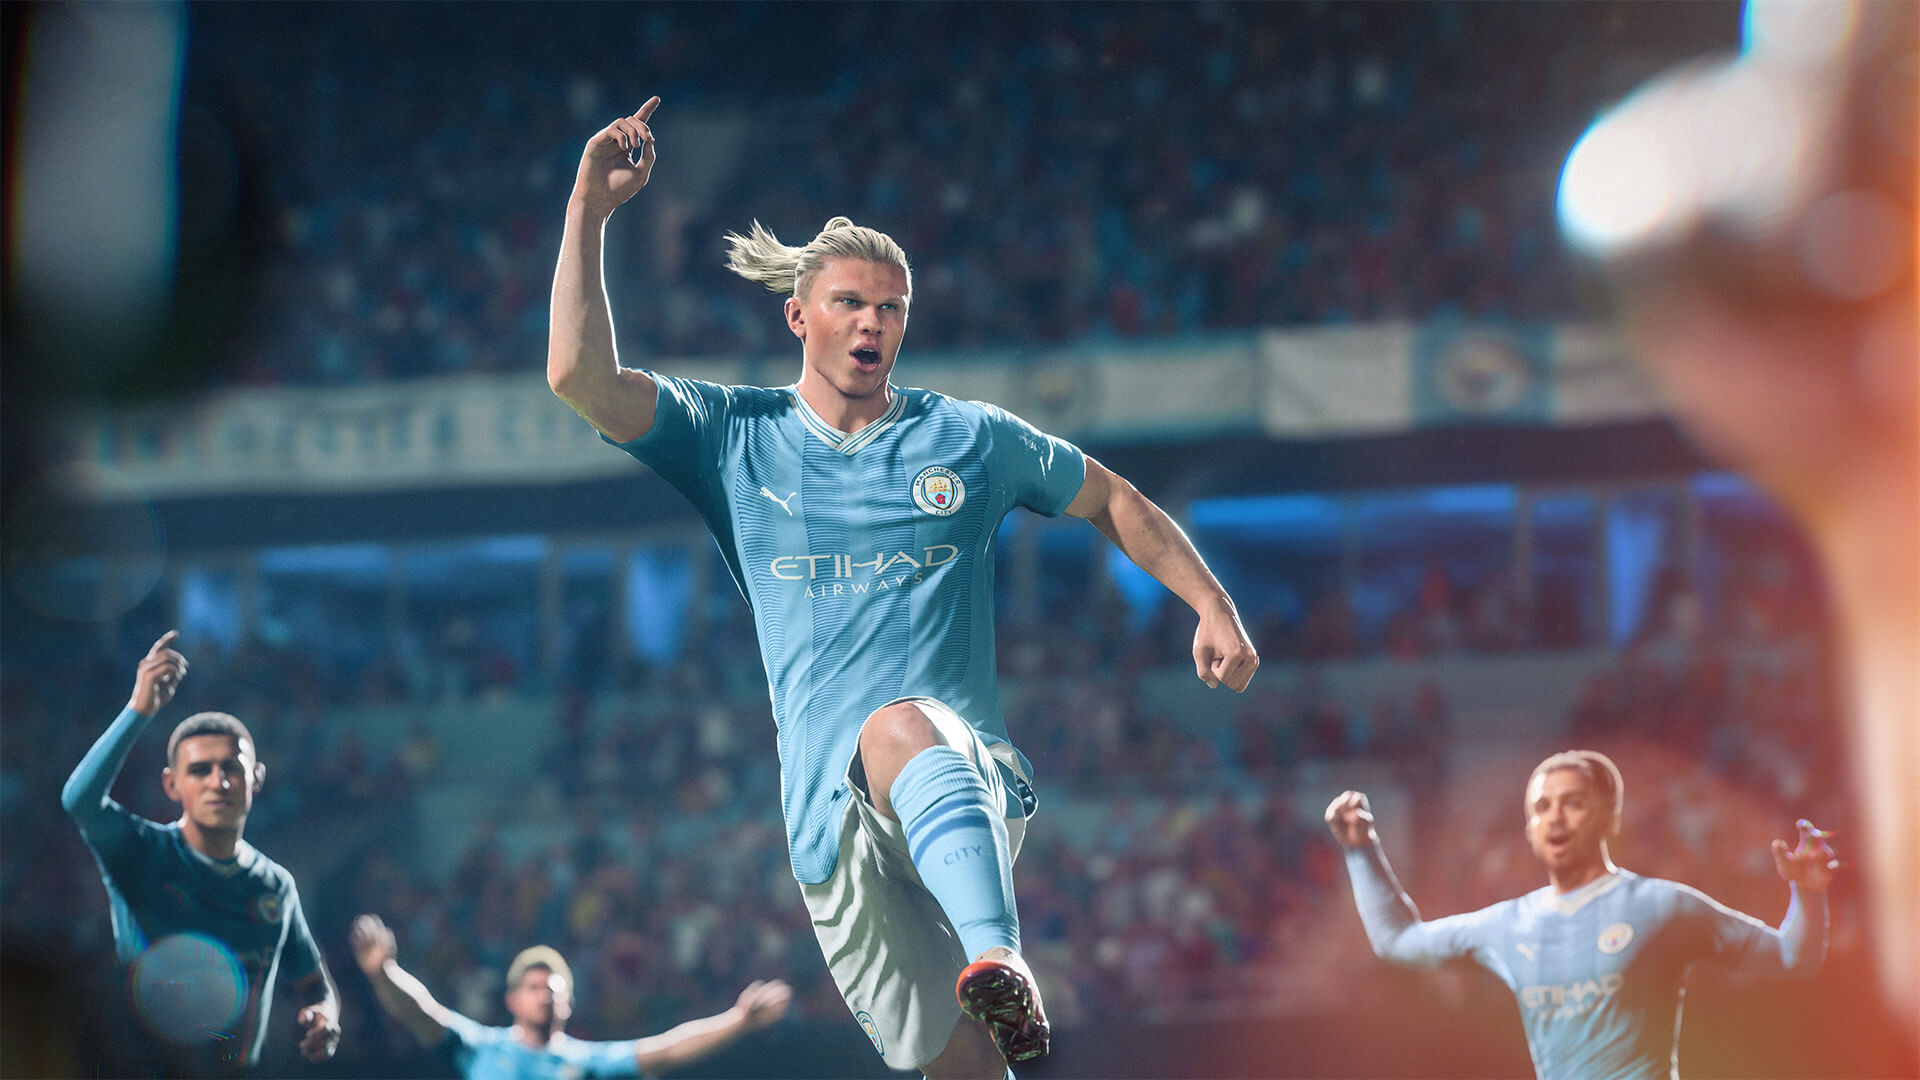 Everything you need to know about EA Sports FC 24 cross-play